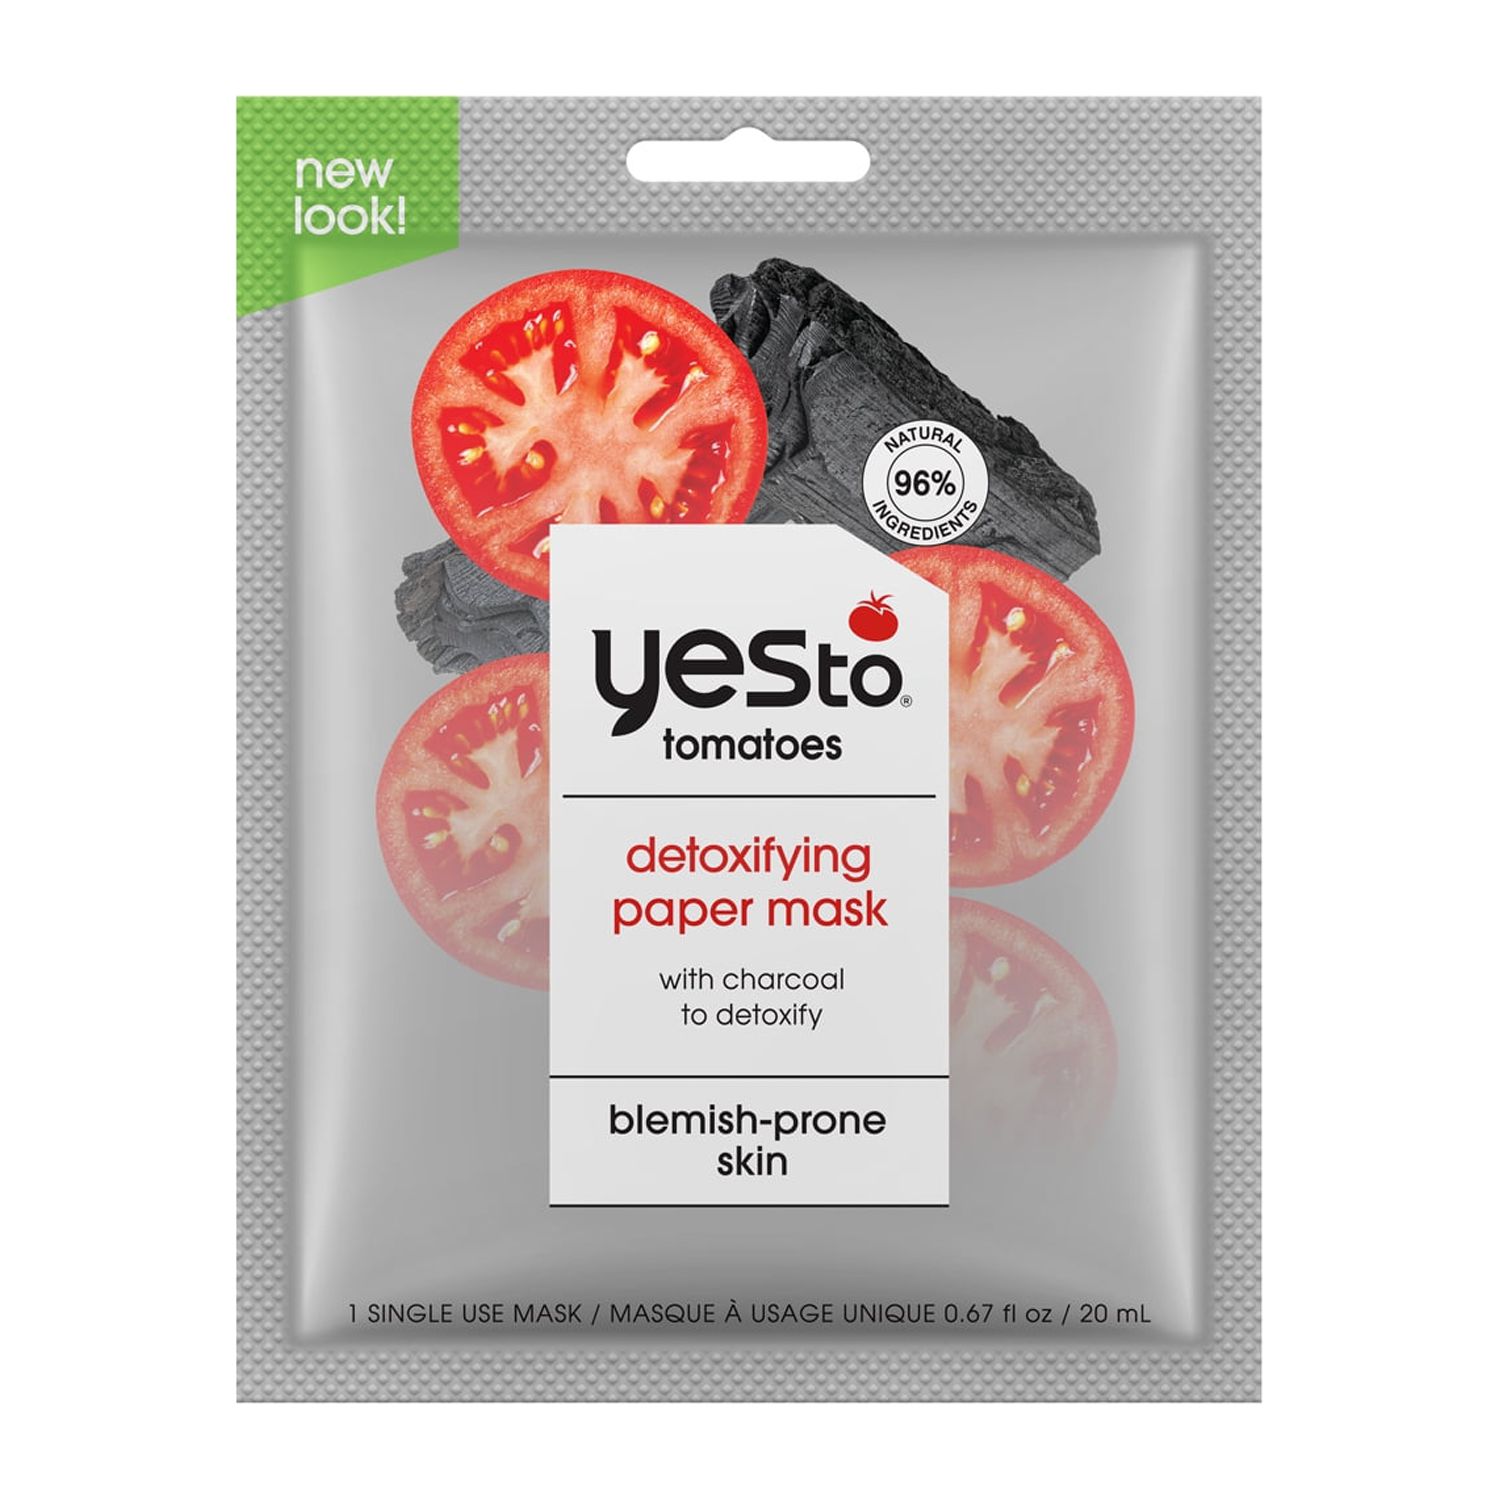 Yes to Tomatoes Detoxifying Charcoal Paper Mask - image 1 of 3